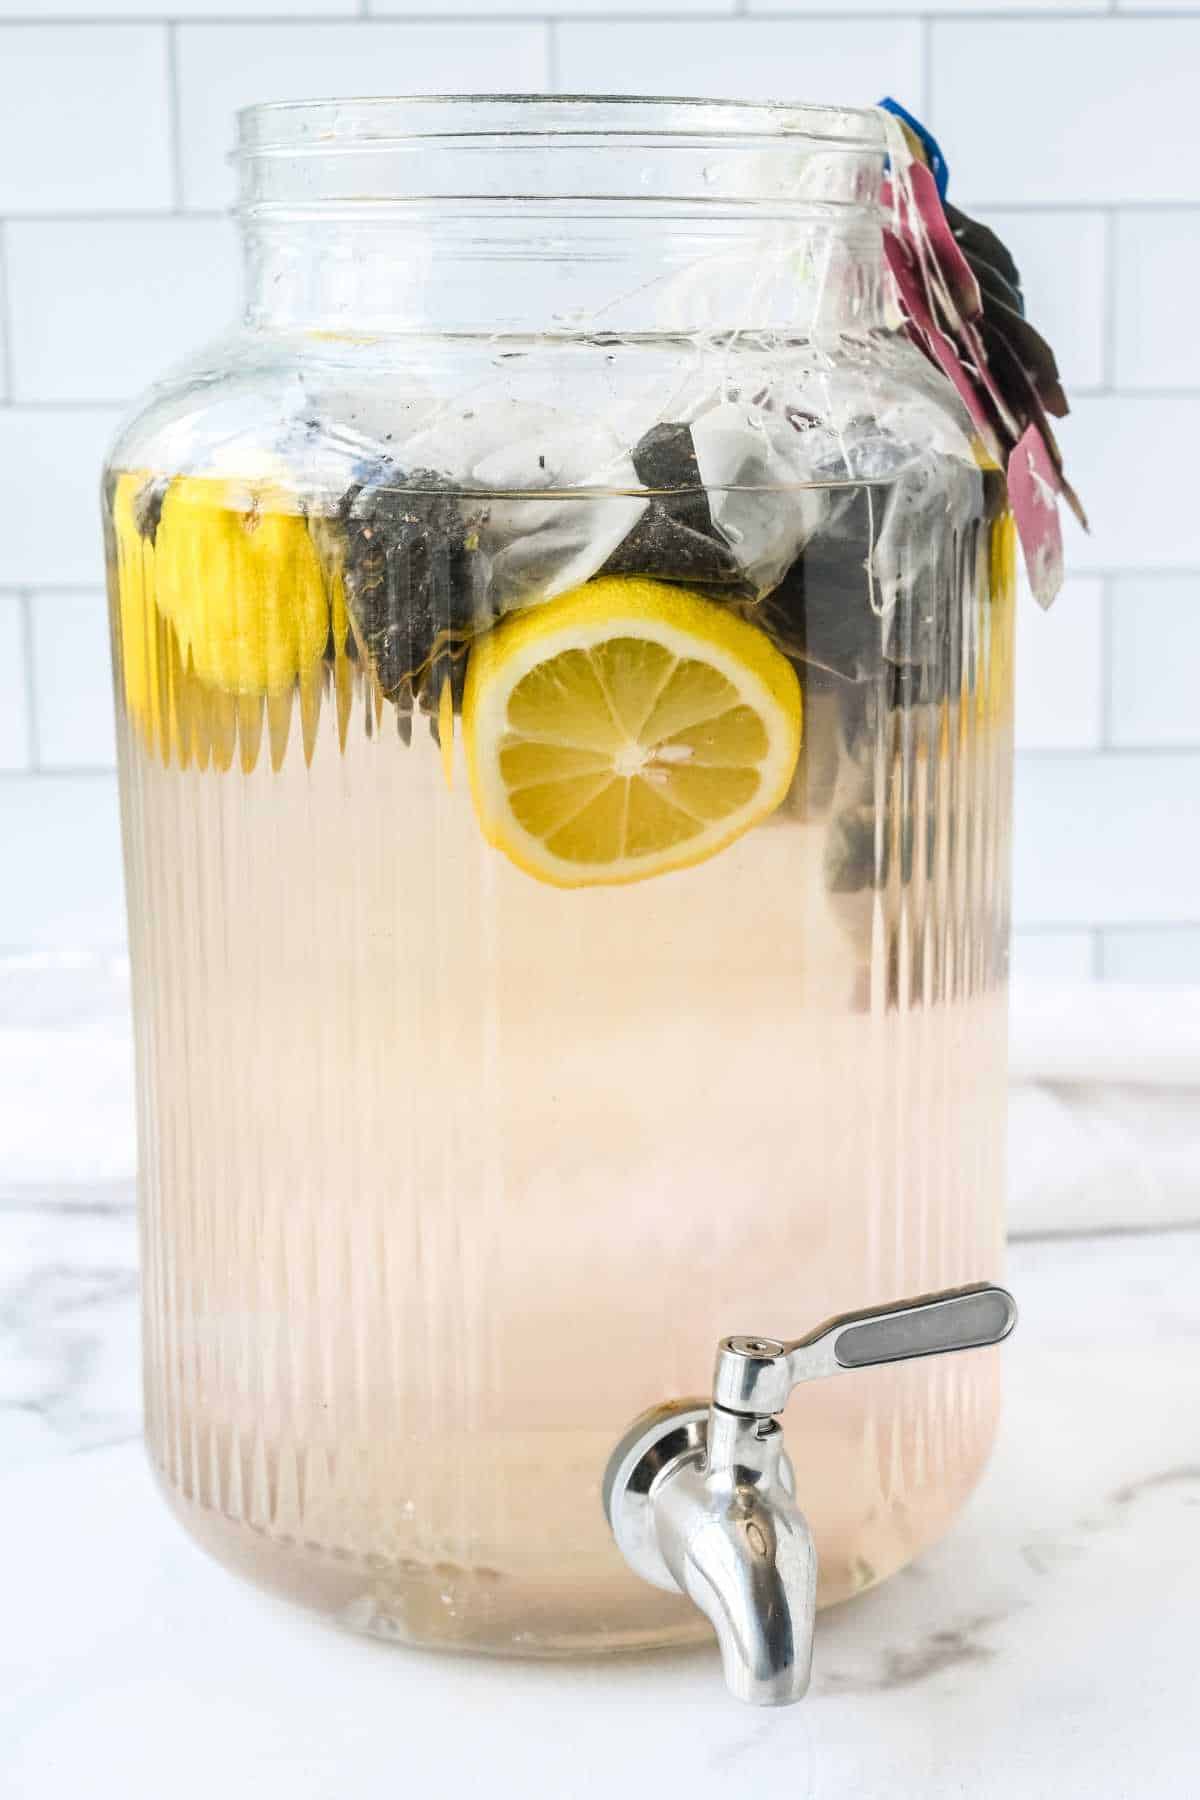 large glass beverage dispenser filled with water, lemons, and tea bags on a white background.